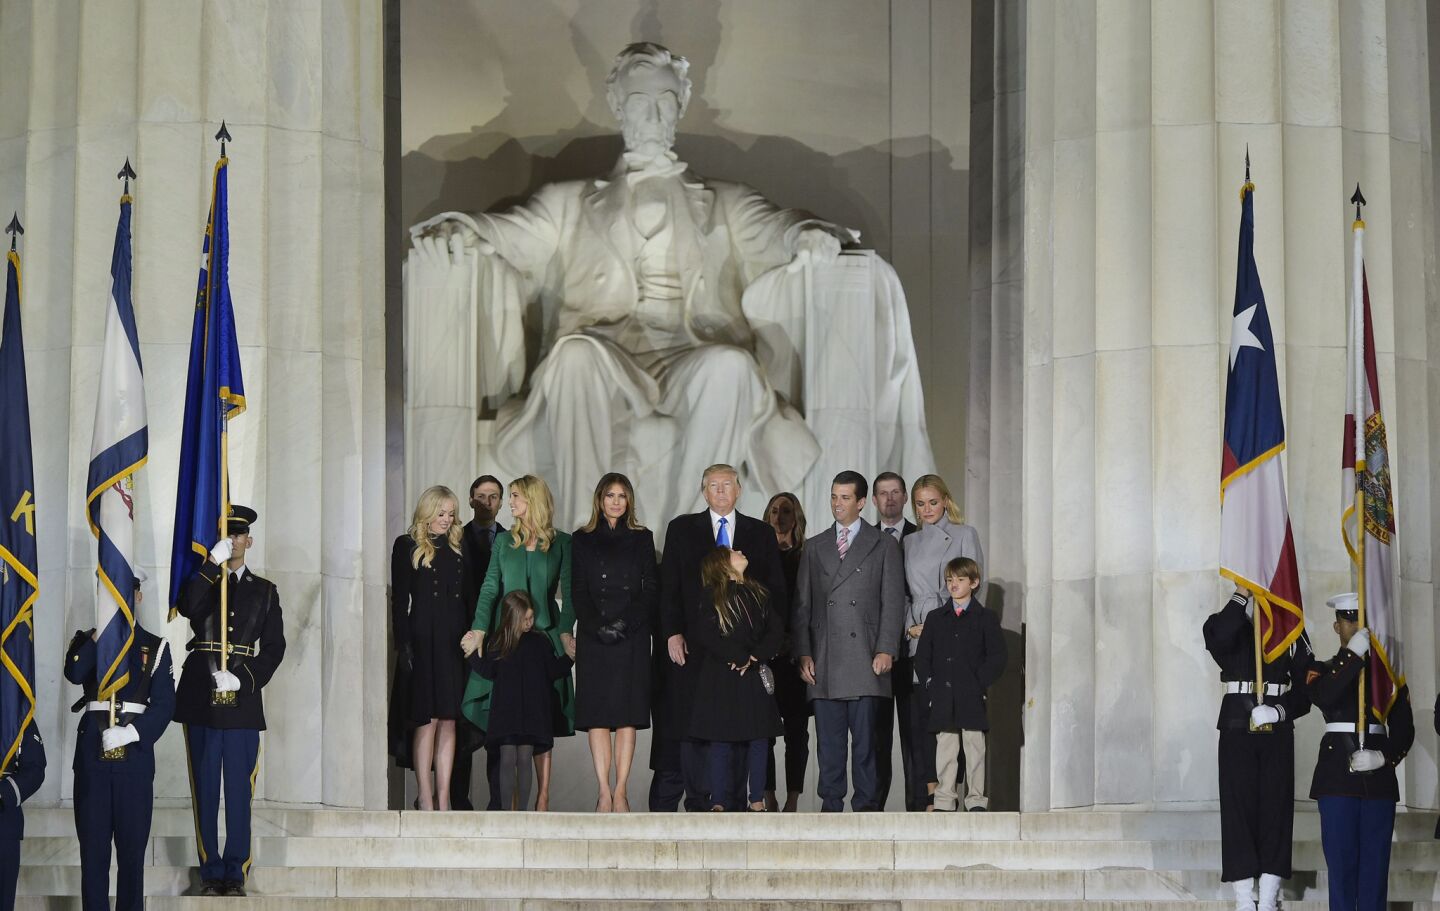 President-elect Donald Trump and family pose at the end of a celebration at the Lincoln Memorial in Washington, D.C., on Thursday.